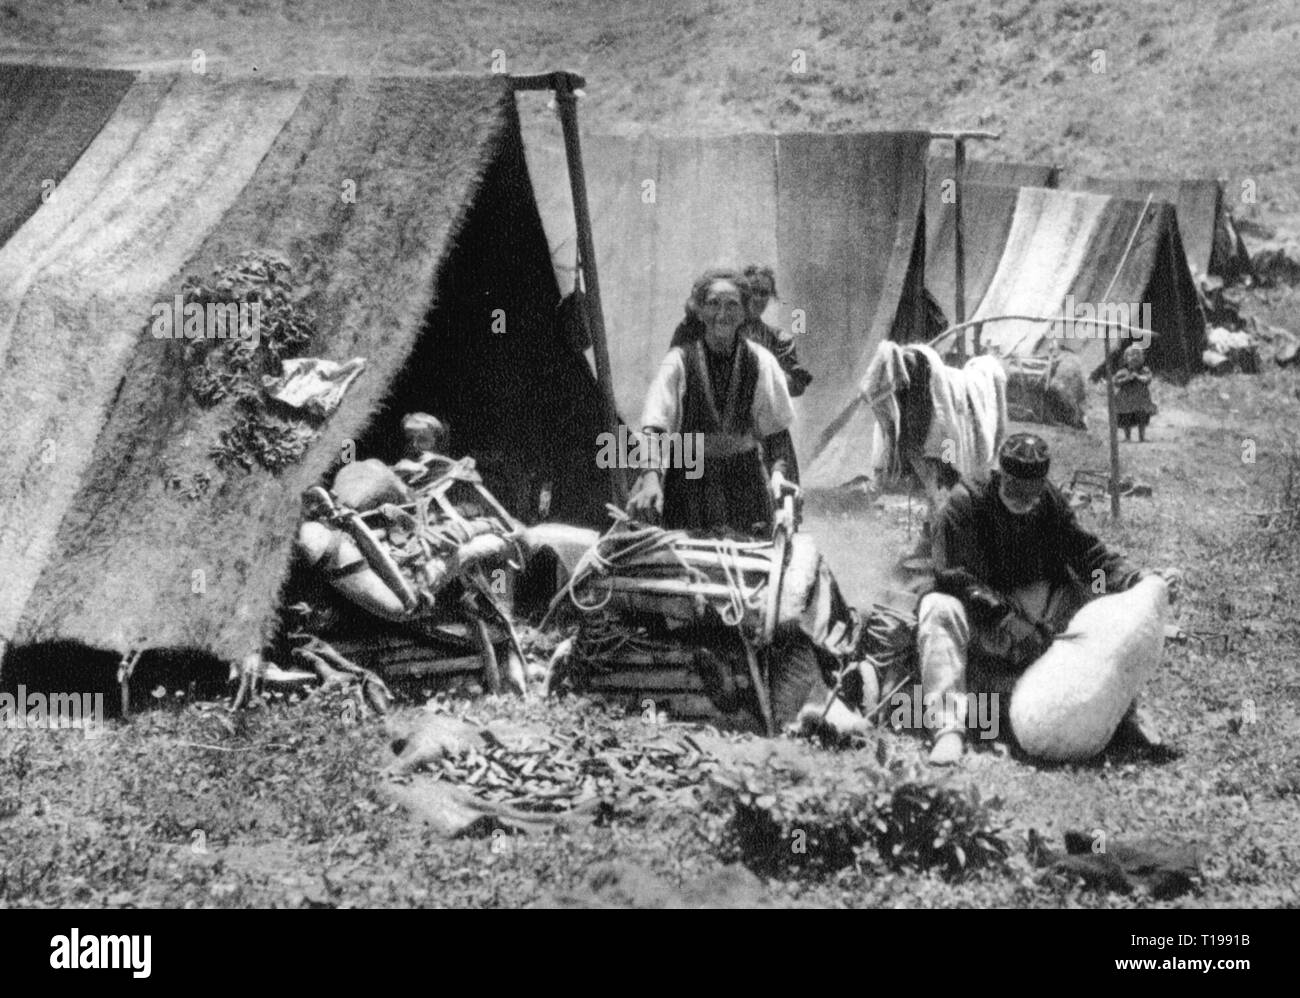 geography / travel historic, Albania, people, Aromanians, camp in the South of Korca, Atlantis, number 10, 1930, tent, tents, ethnicity, ethnic, ethnical, ethnicities, group, groups, Korce, Kingdom of Albania, the Balkans, Balkan Peninsula, Europe, 20th century, 1930s, number, numbers, historic, historical, Additional-Rights-Clearance-Info-Not-Available Stock Photo